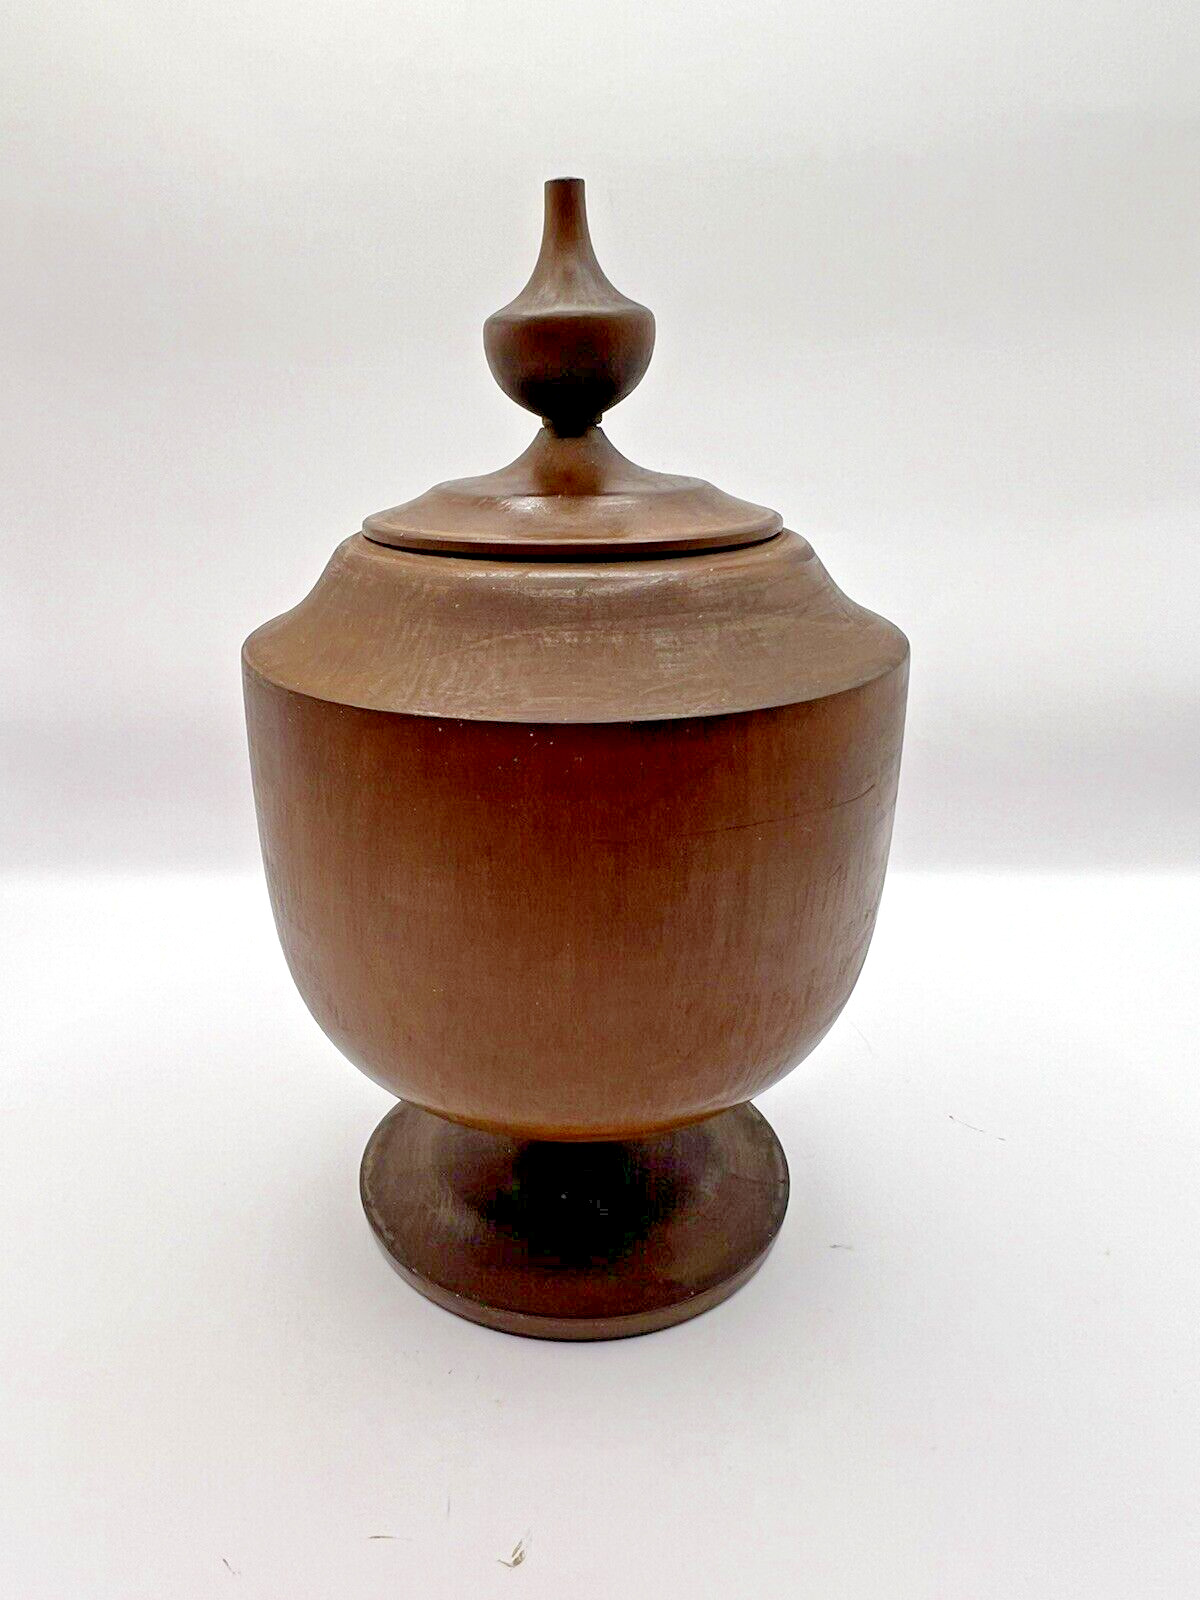 Wooden Tobacco Spice Container Box Primitive Trinket Box with Lid Finial Vintage